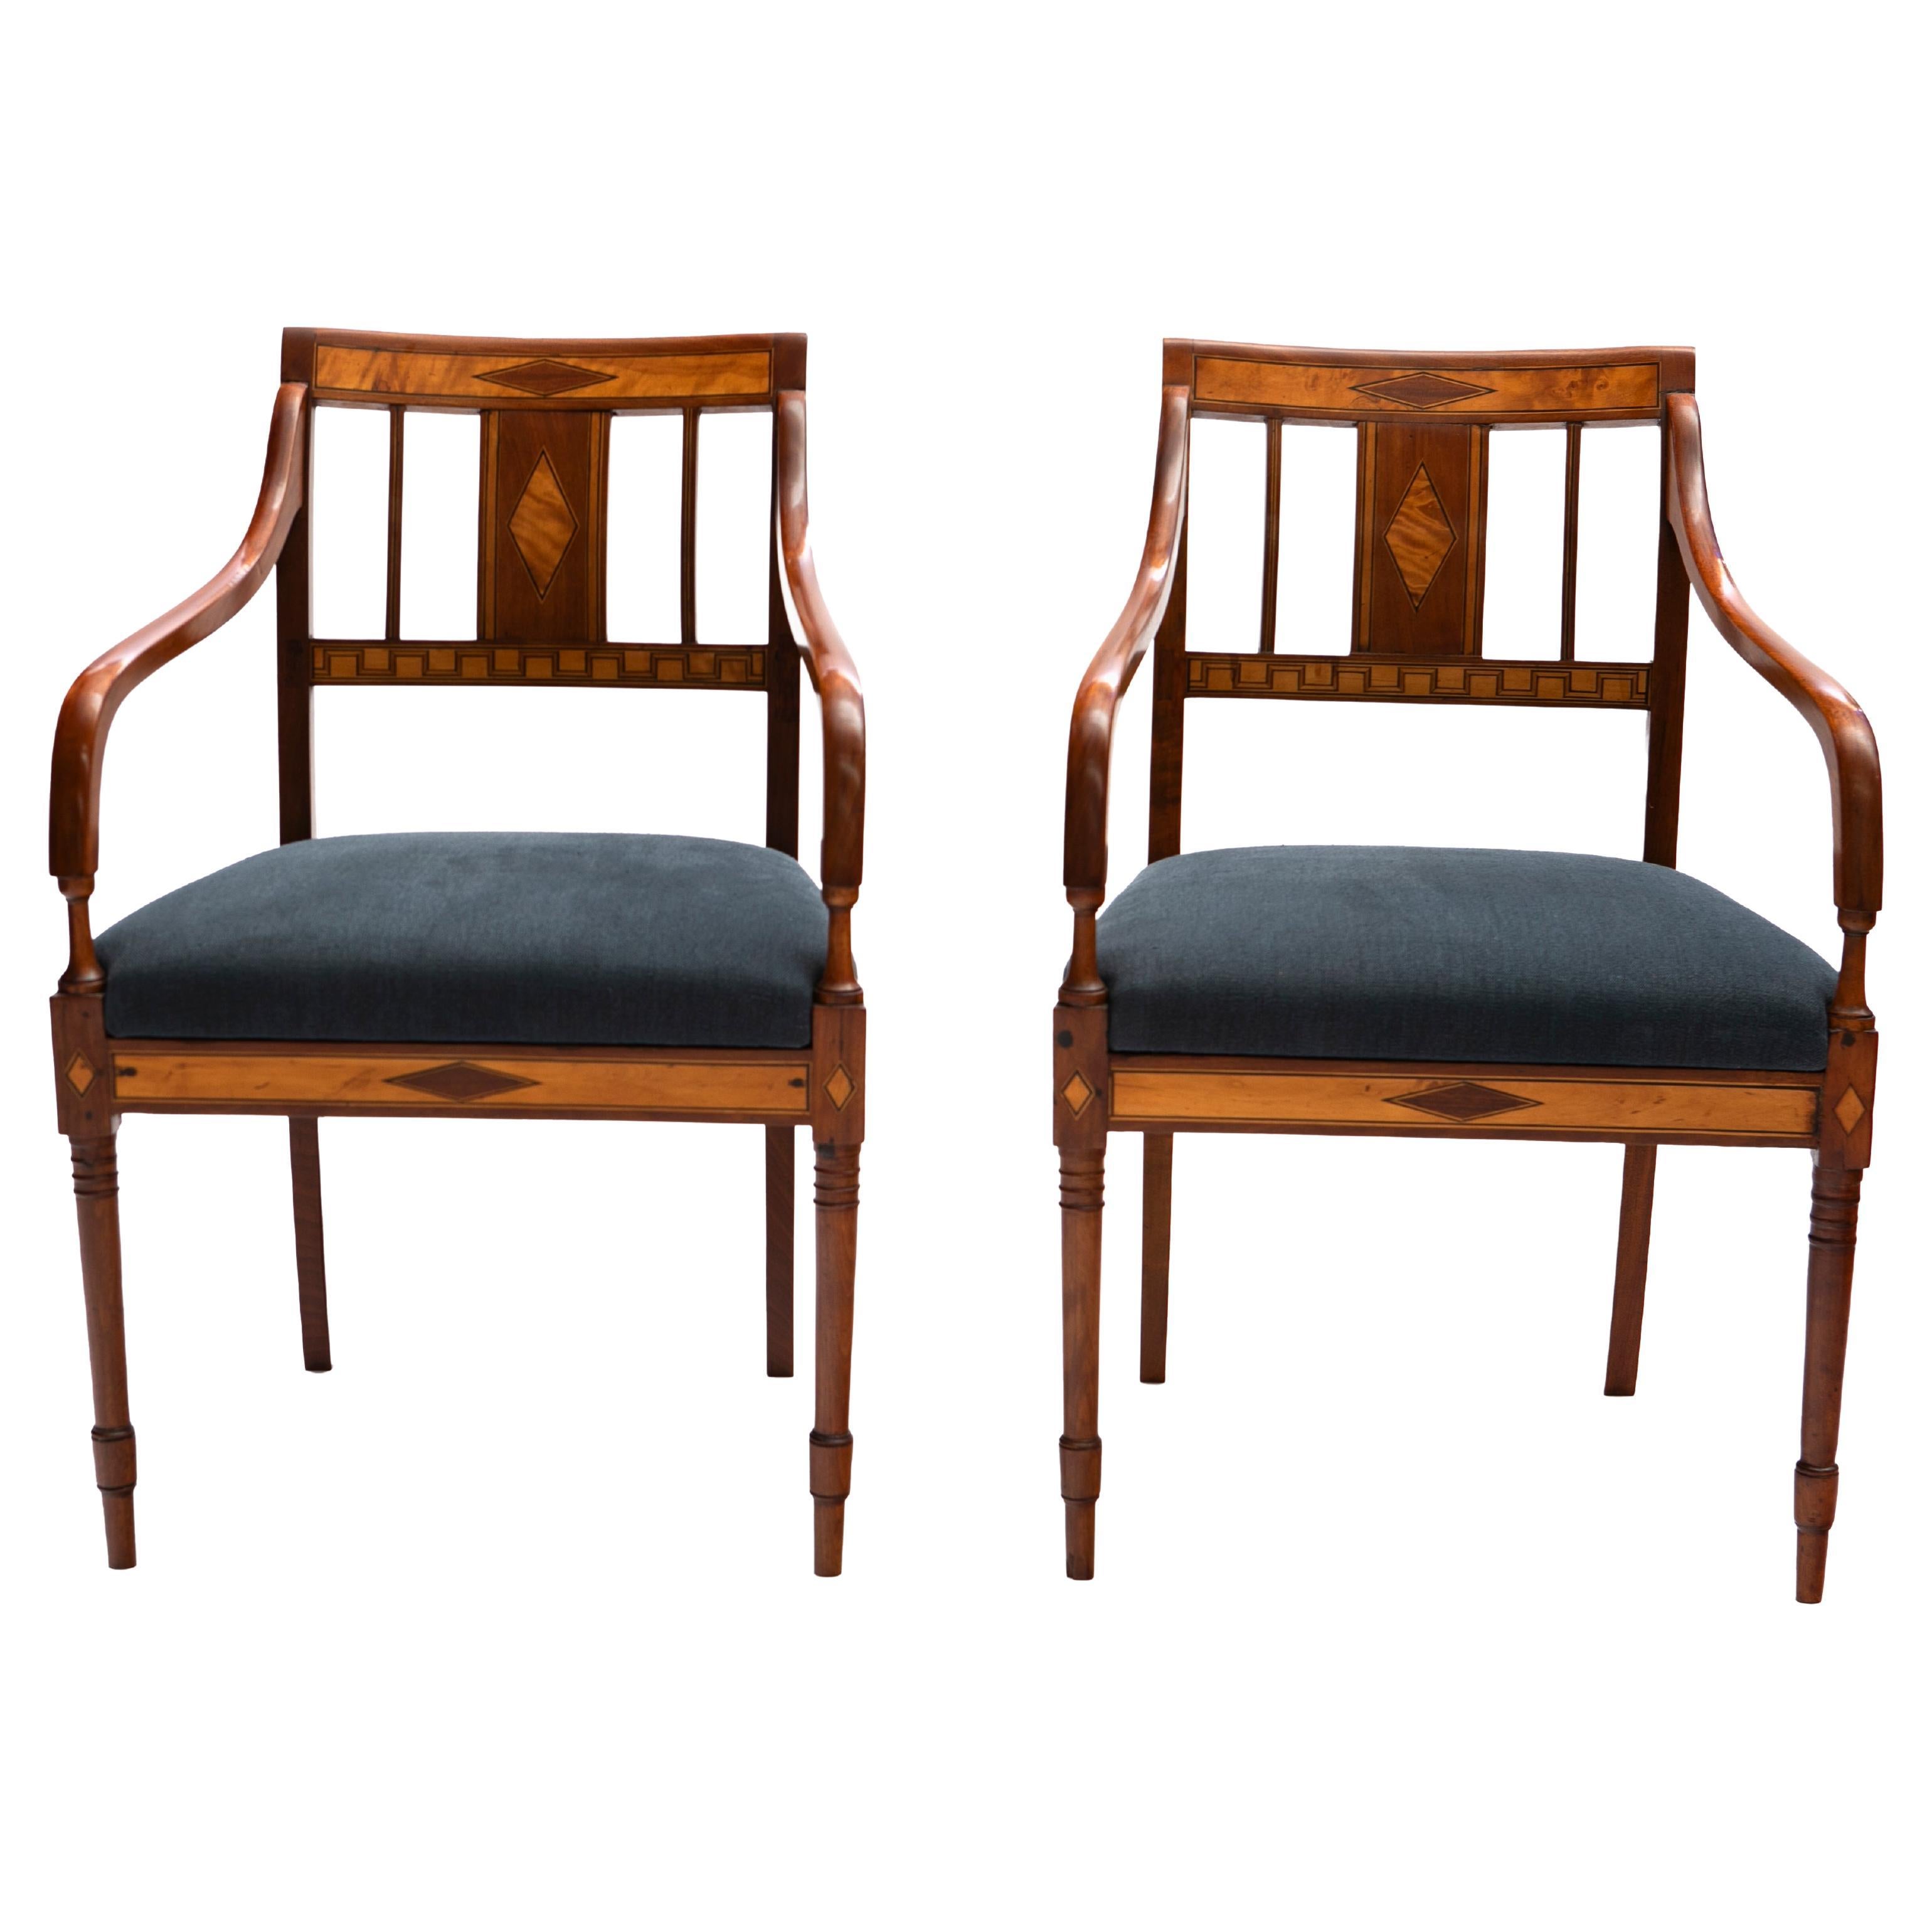 Antique Pair of Danish Empire Arm Chairs For Sale